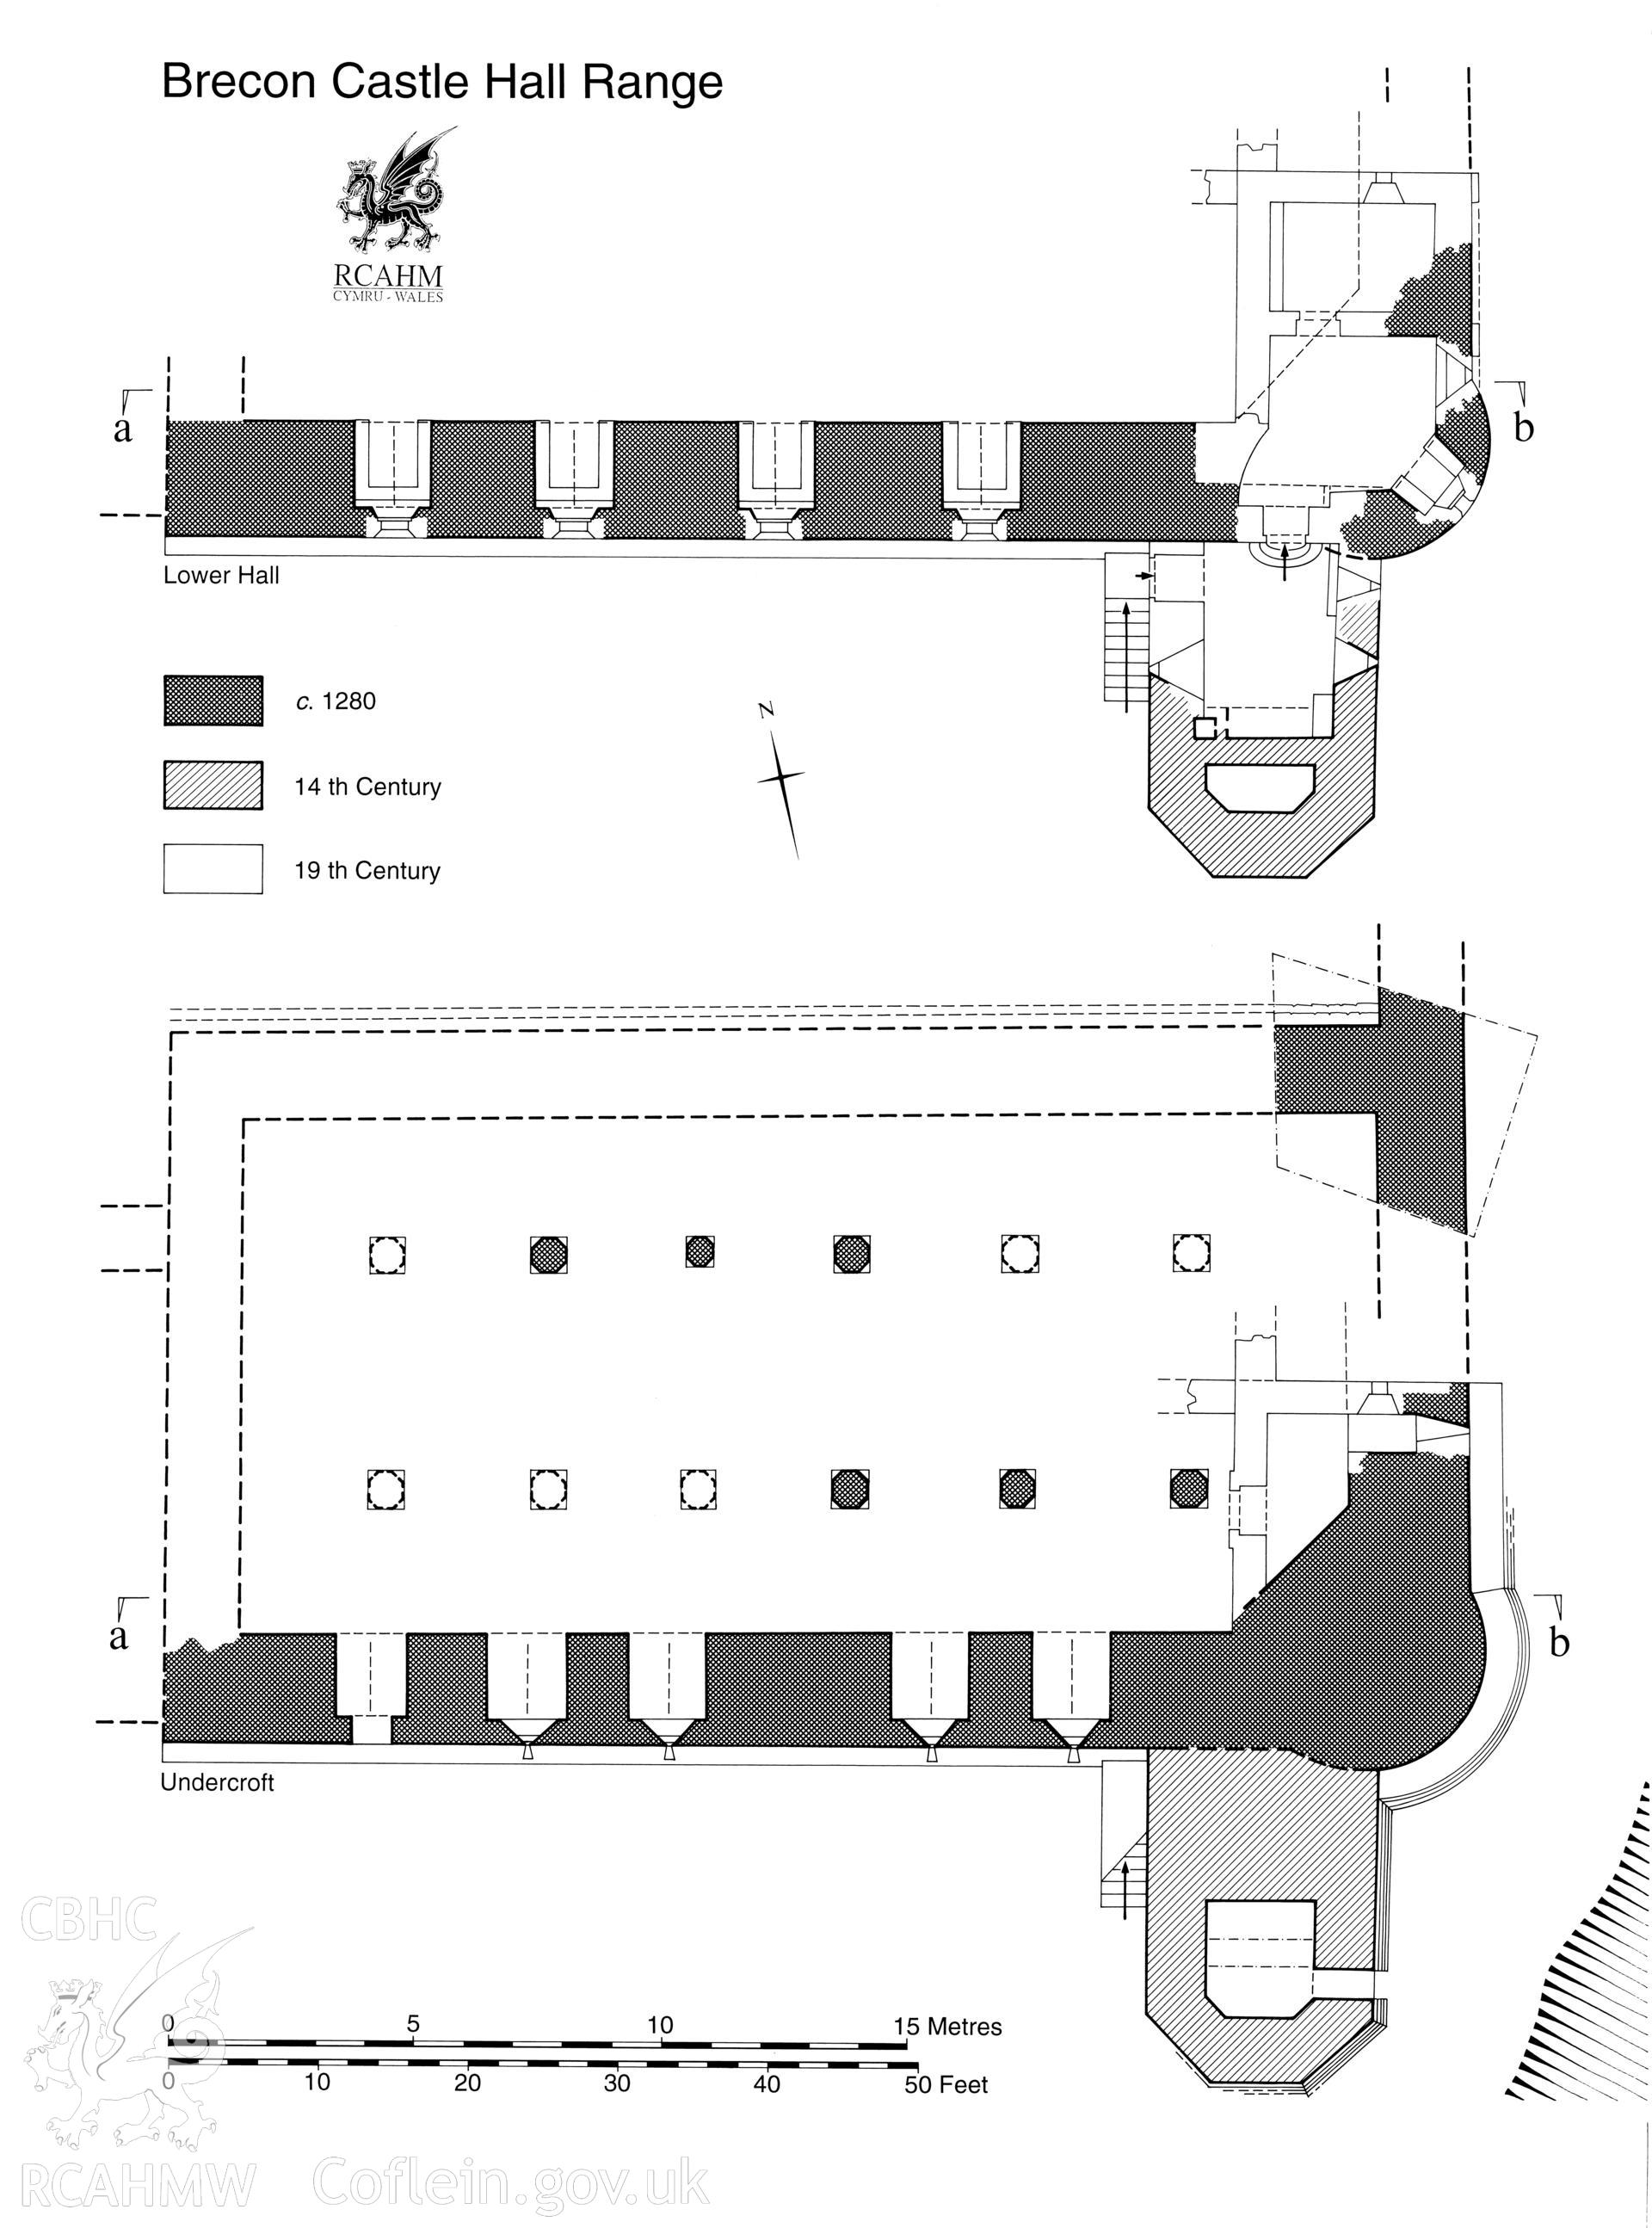 Measured plan of the hall range at Brecon Castle showing building development, produced by RCAHMW